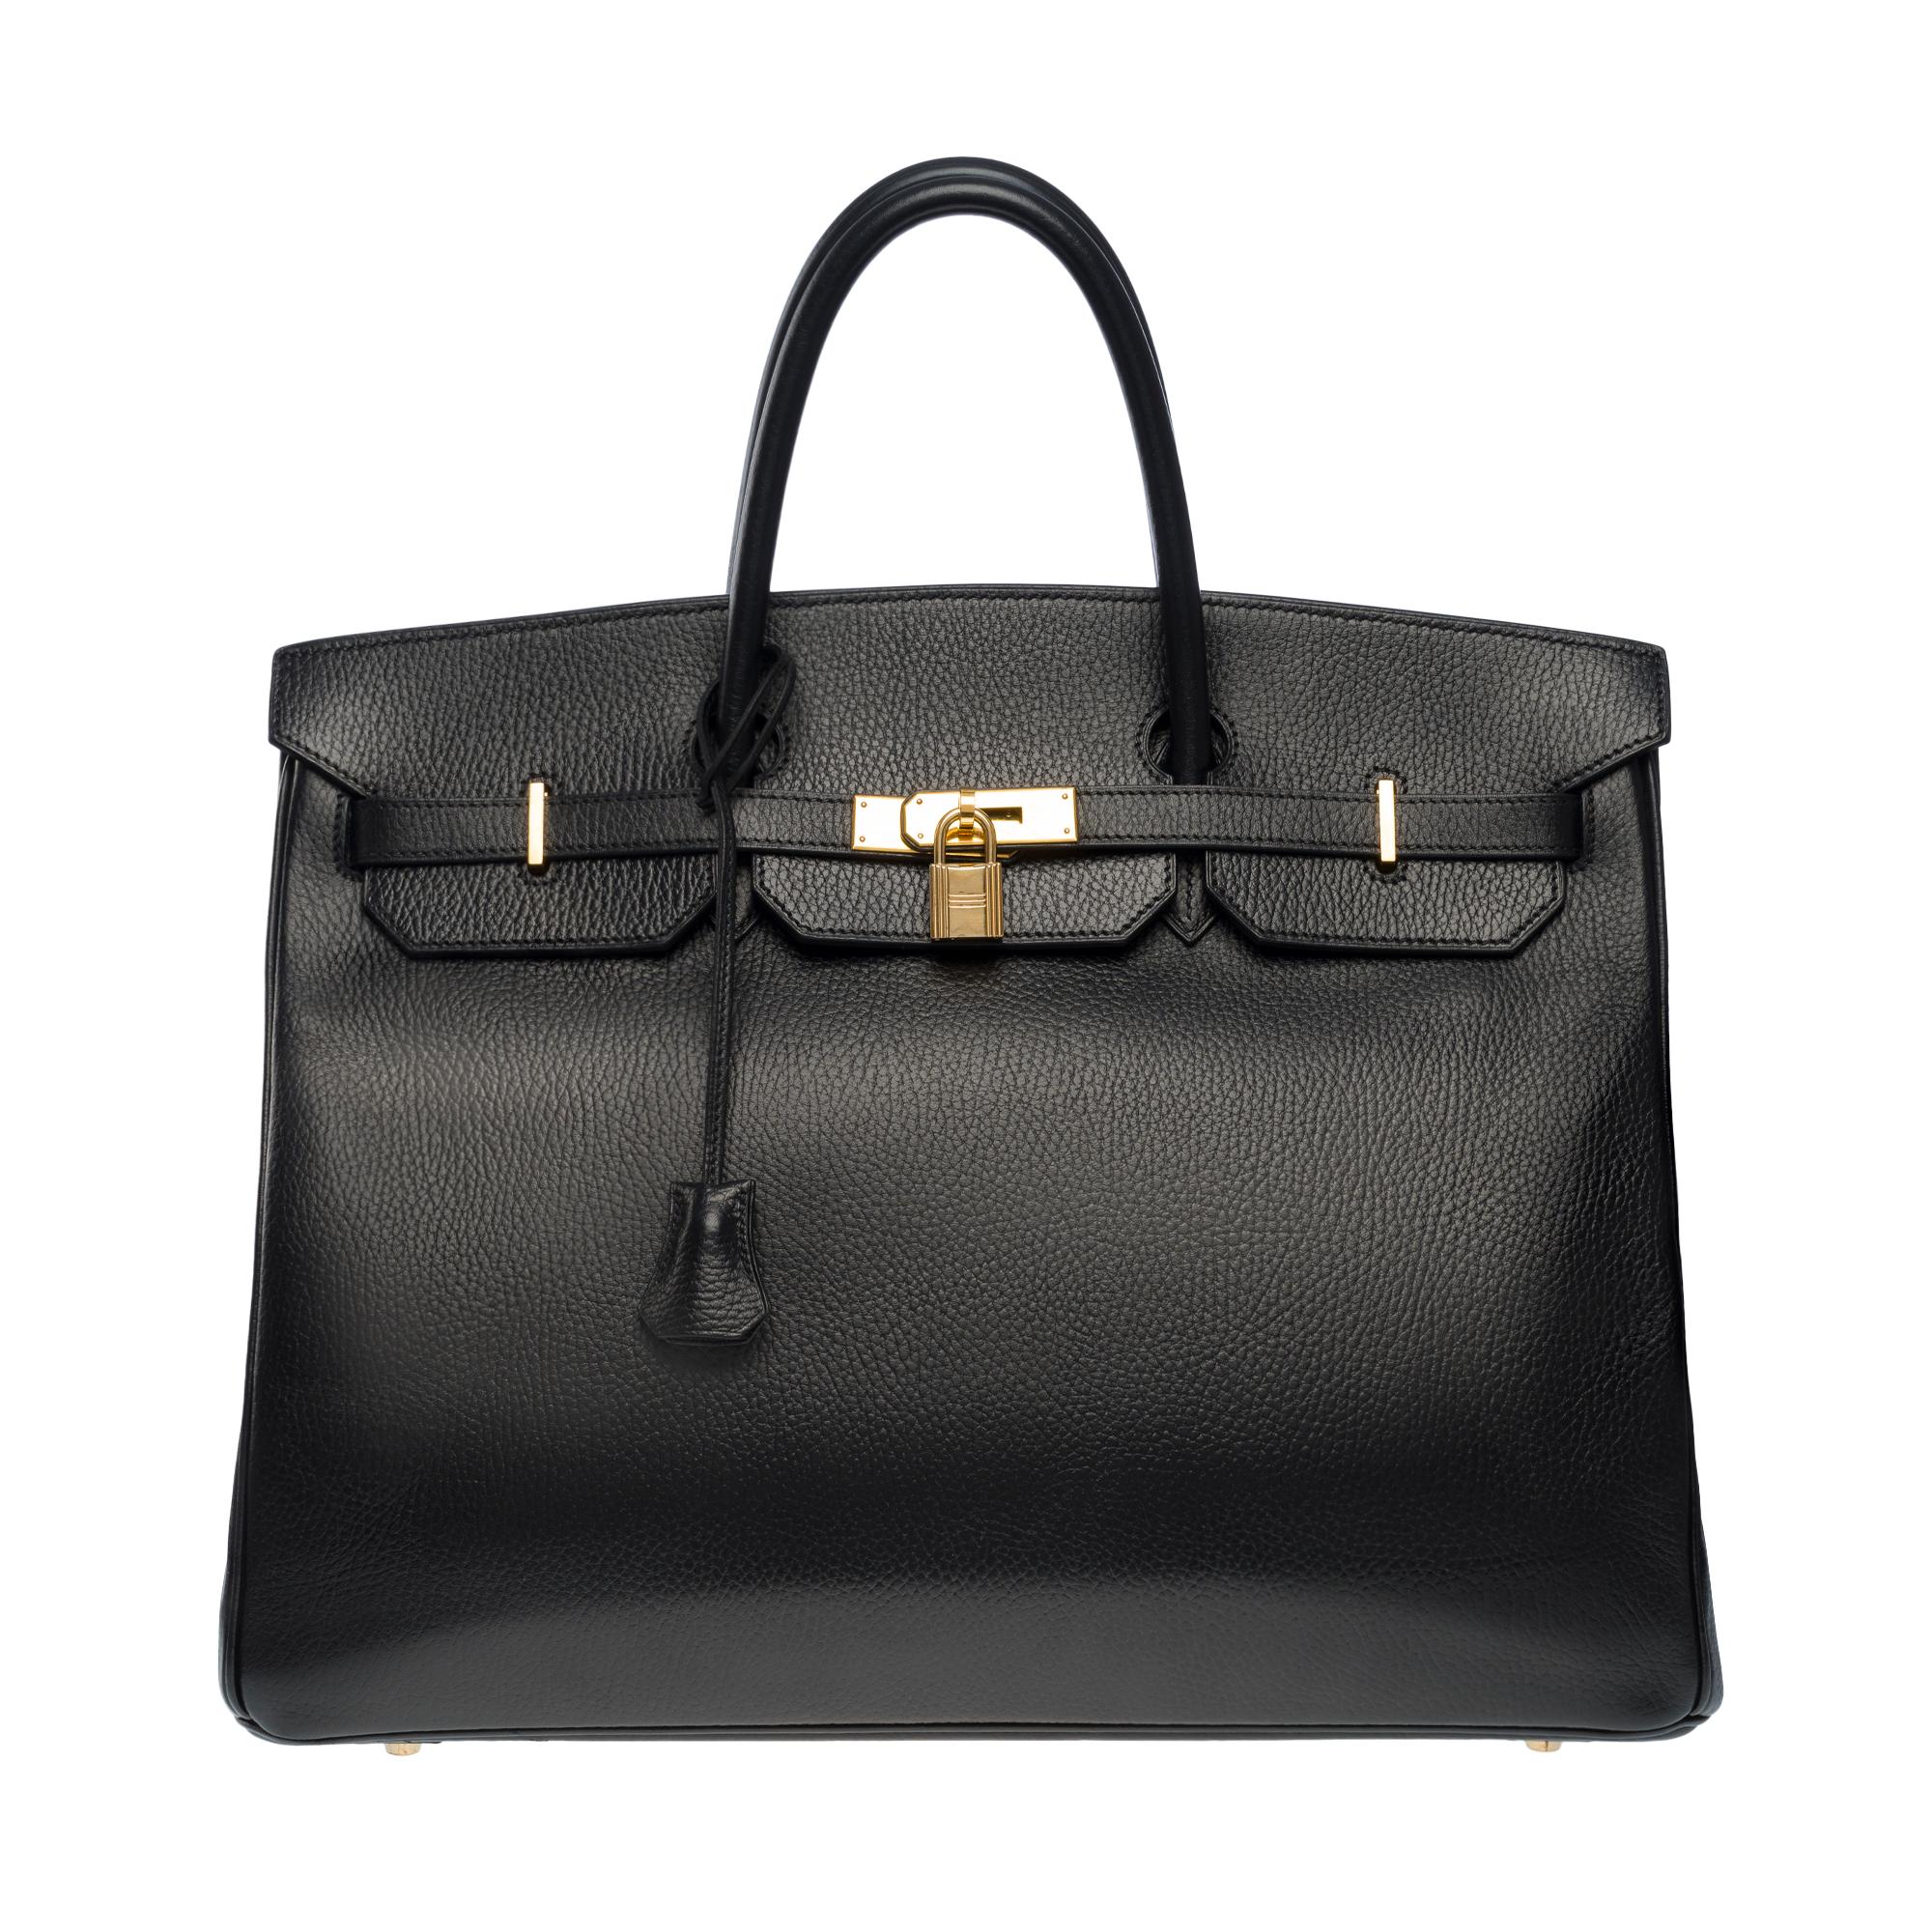 Beautiful​ ​Hermes​ ​Birkin​ ​40​ ​cm​ ​in​ ​black​ ​Vache​ ​Ardennes​ ​calf​ ​leather,​ ​gold​ ​plated​ ​metal​ ​hardware,​ ​double​ ​handle​ ​in​ ​black​ ​leather​ ​allowing​ ​a​ ​hand​ ​carry

Flap​ ​closure
Black​ ​leather​ ​inner​ ​lining,​ ​​